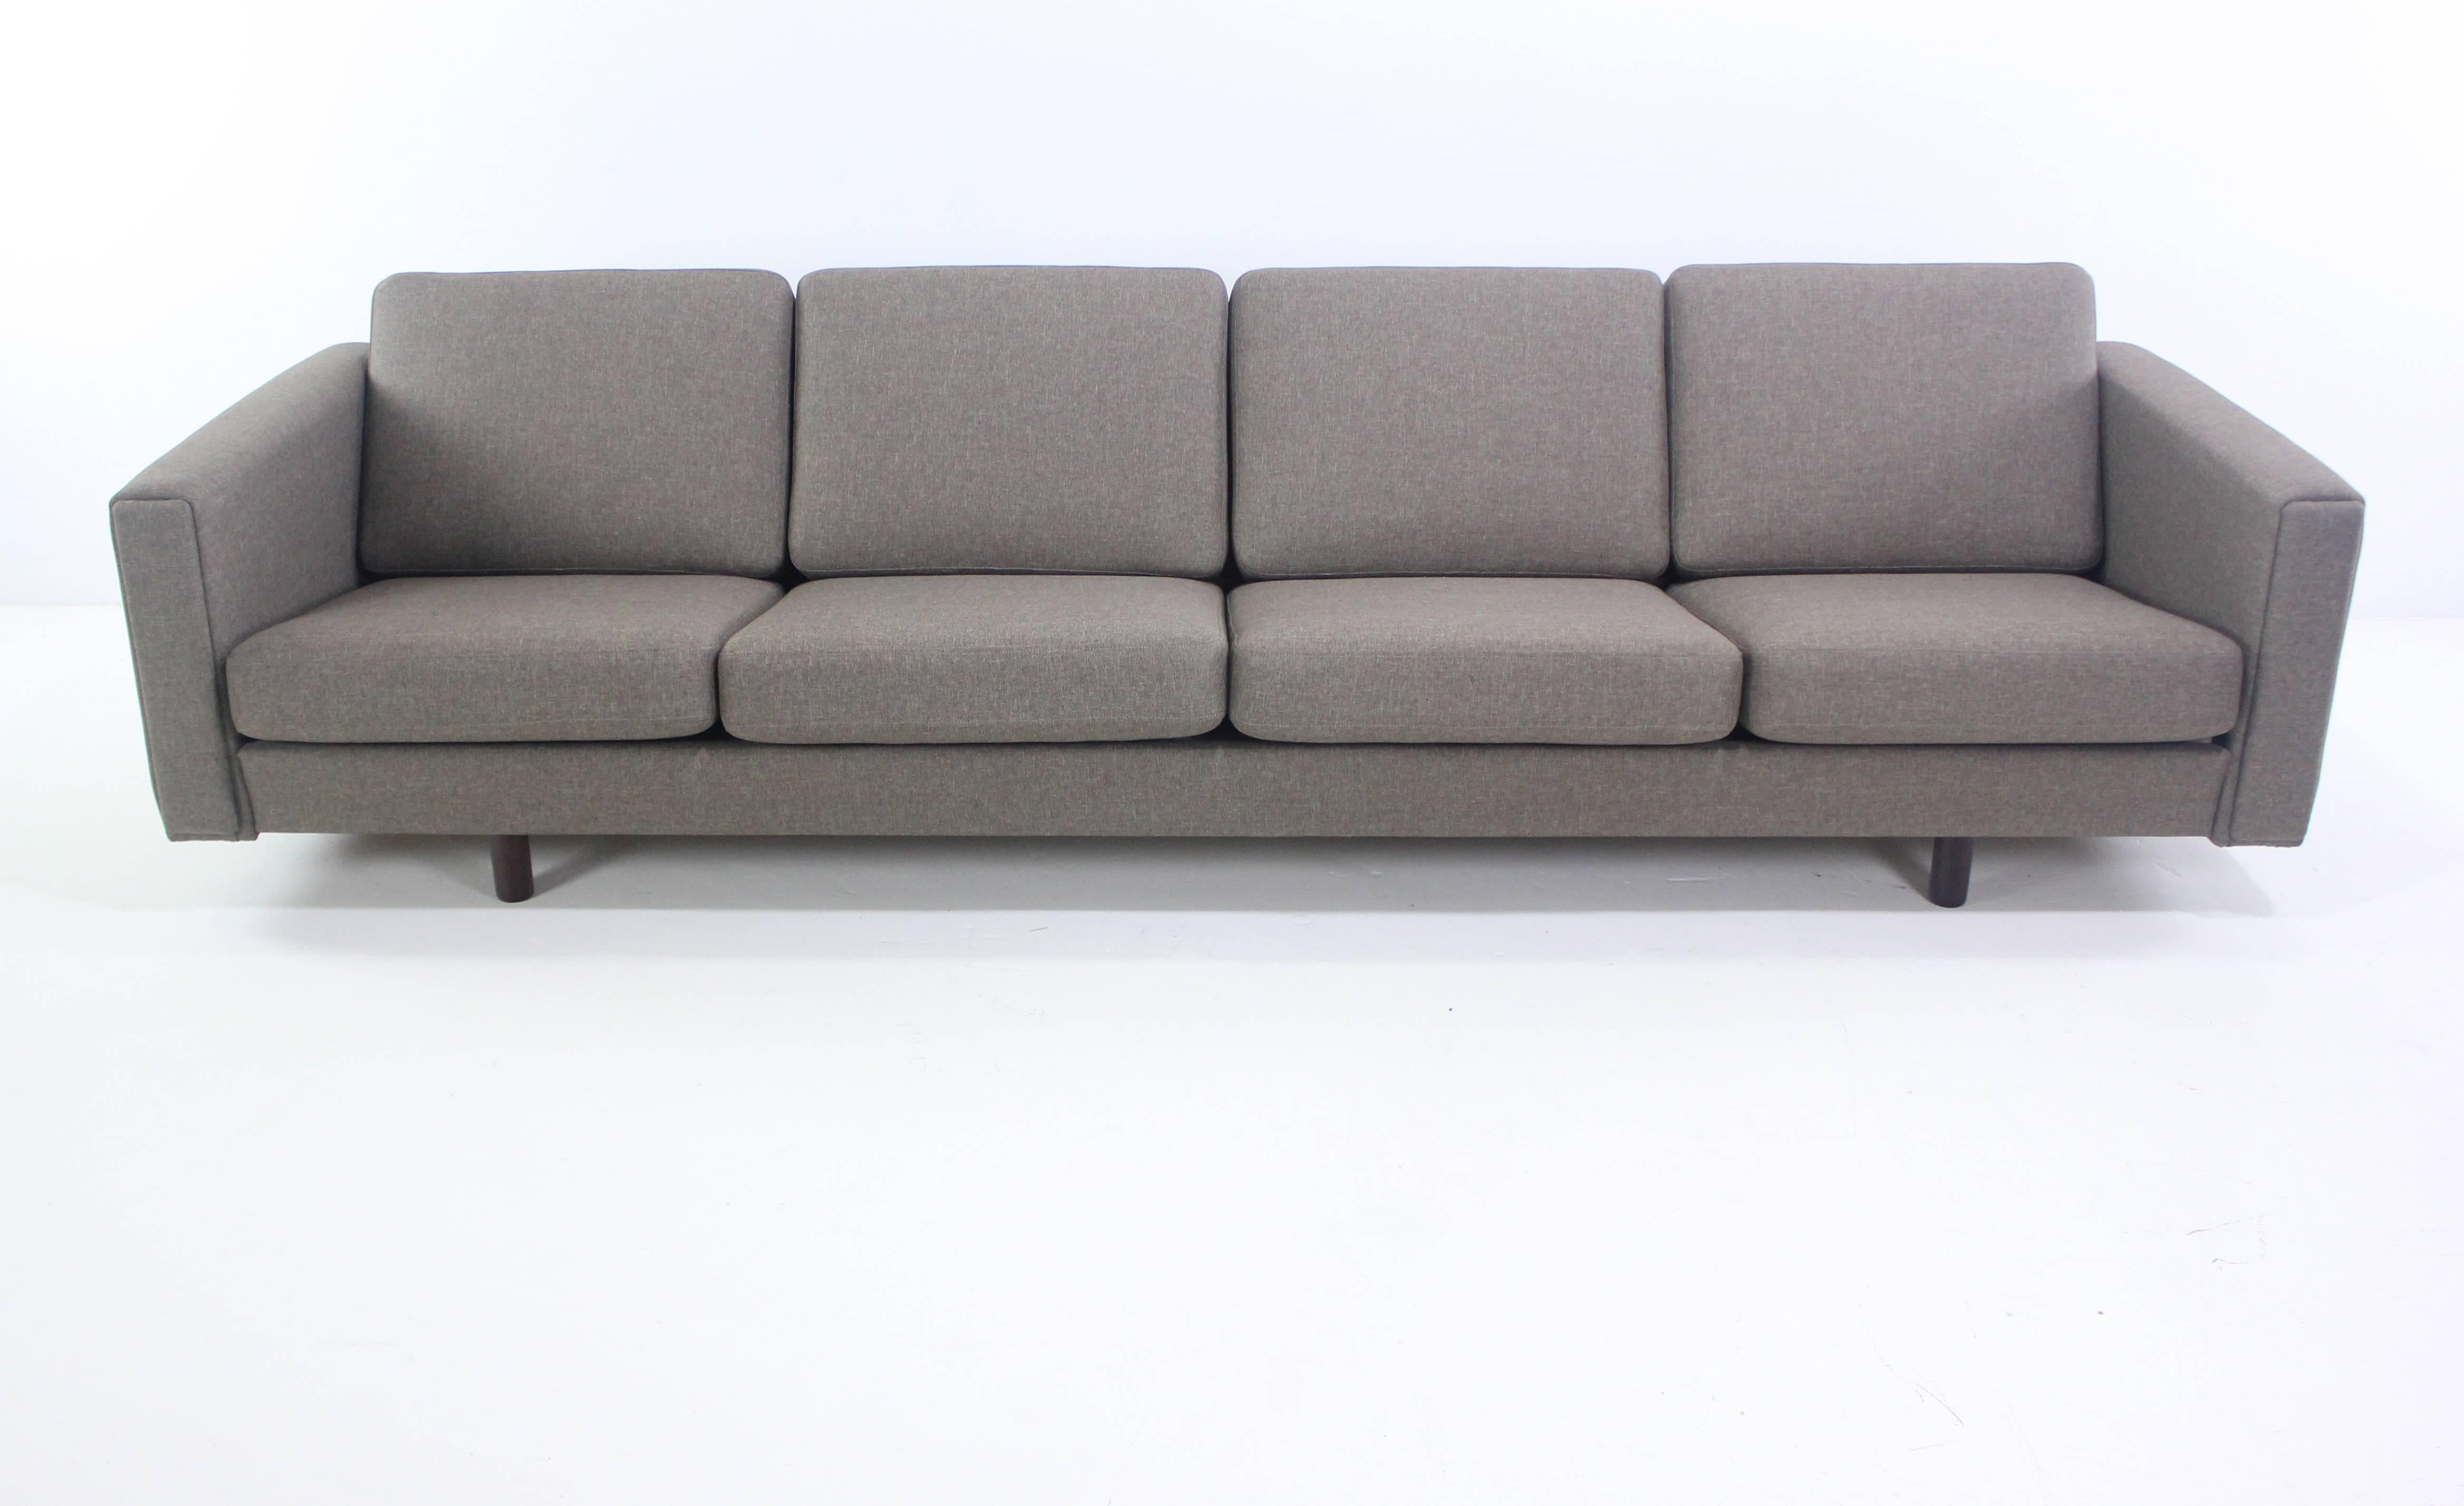 Dramatic Danish Modern Four-Place Sofa Designed by Hans Wegner In Excellent Condition For Sale In Portland, OR